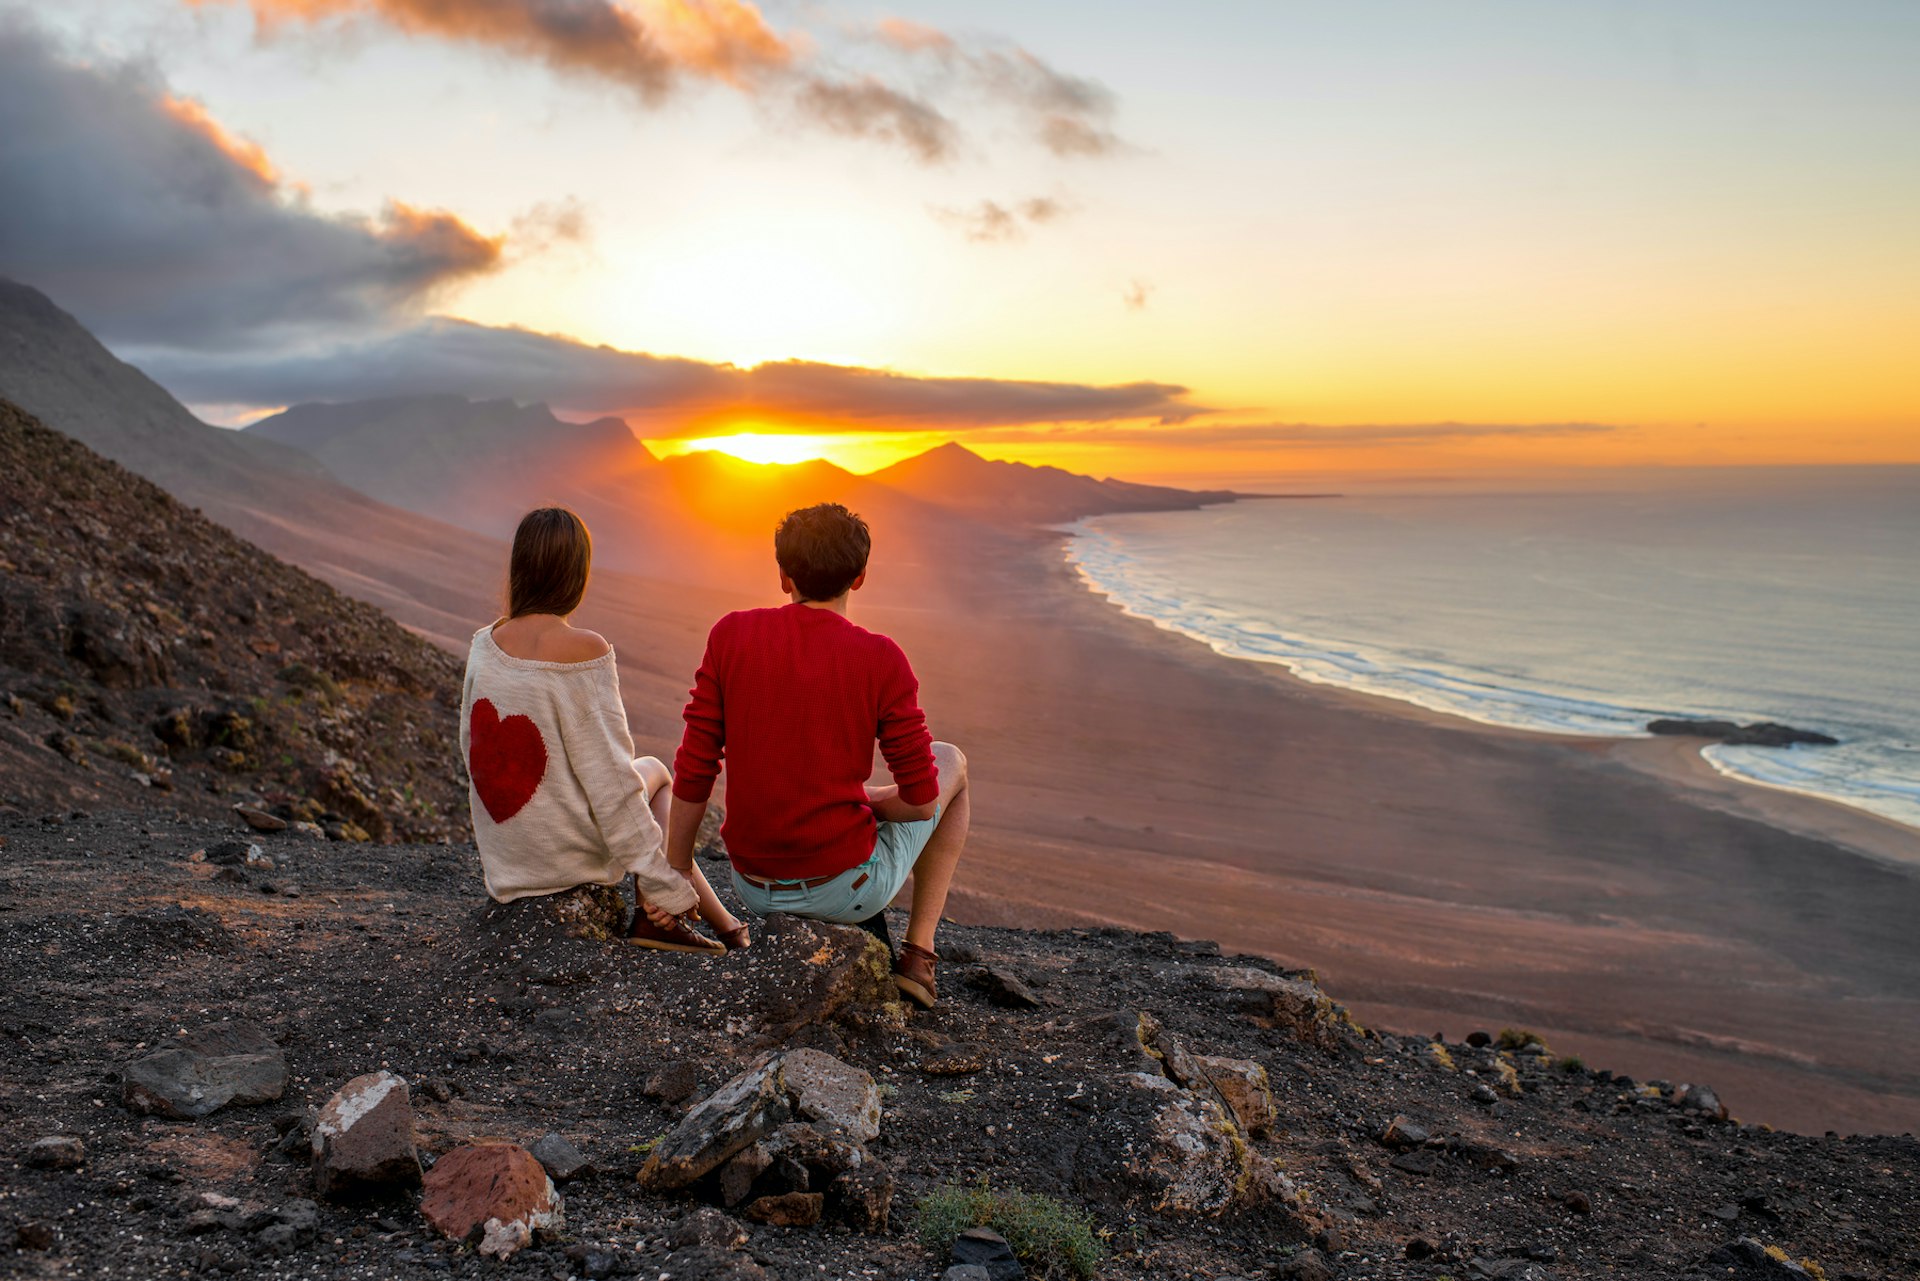 Young couple enjoying beautiful sunset sitting together on the mountain with great view on Cofete coastline on Fuerteventura island